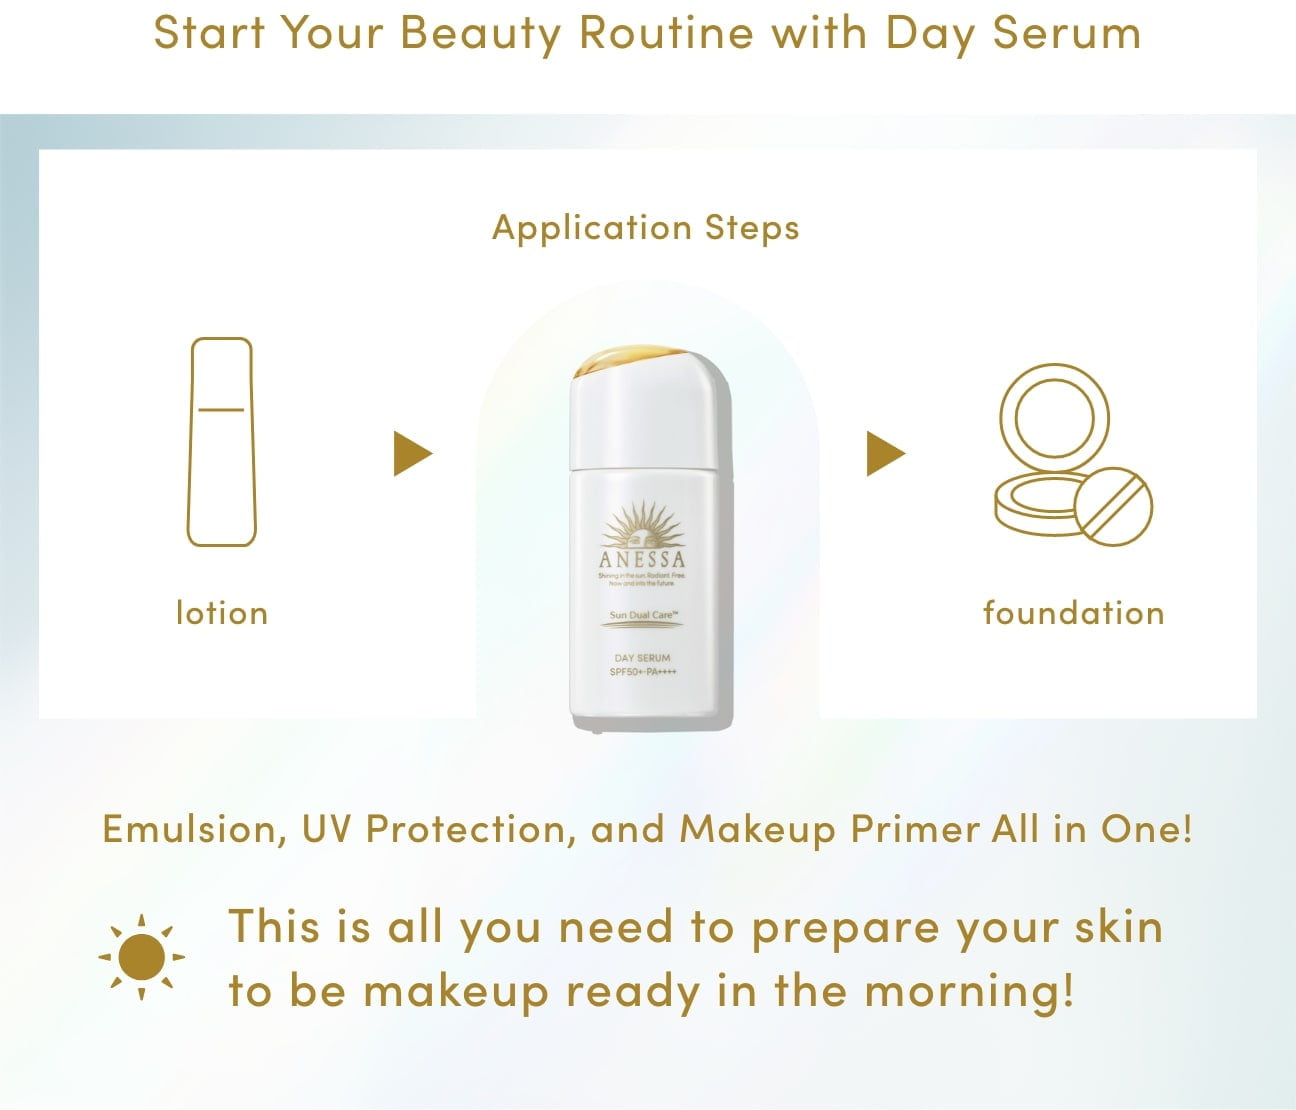 Start Your Beauty Routine with Day Serum Application Steps lotion ANESSA Day Serum foundation Emulsion, UV Protection, and Makeup Primer All in One! This is all you need to prepare your skin to be makeup ready in the morning!